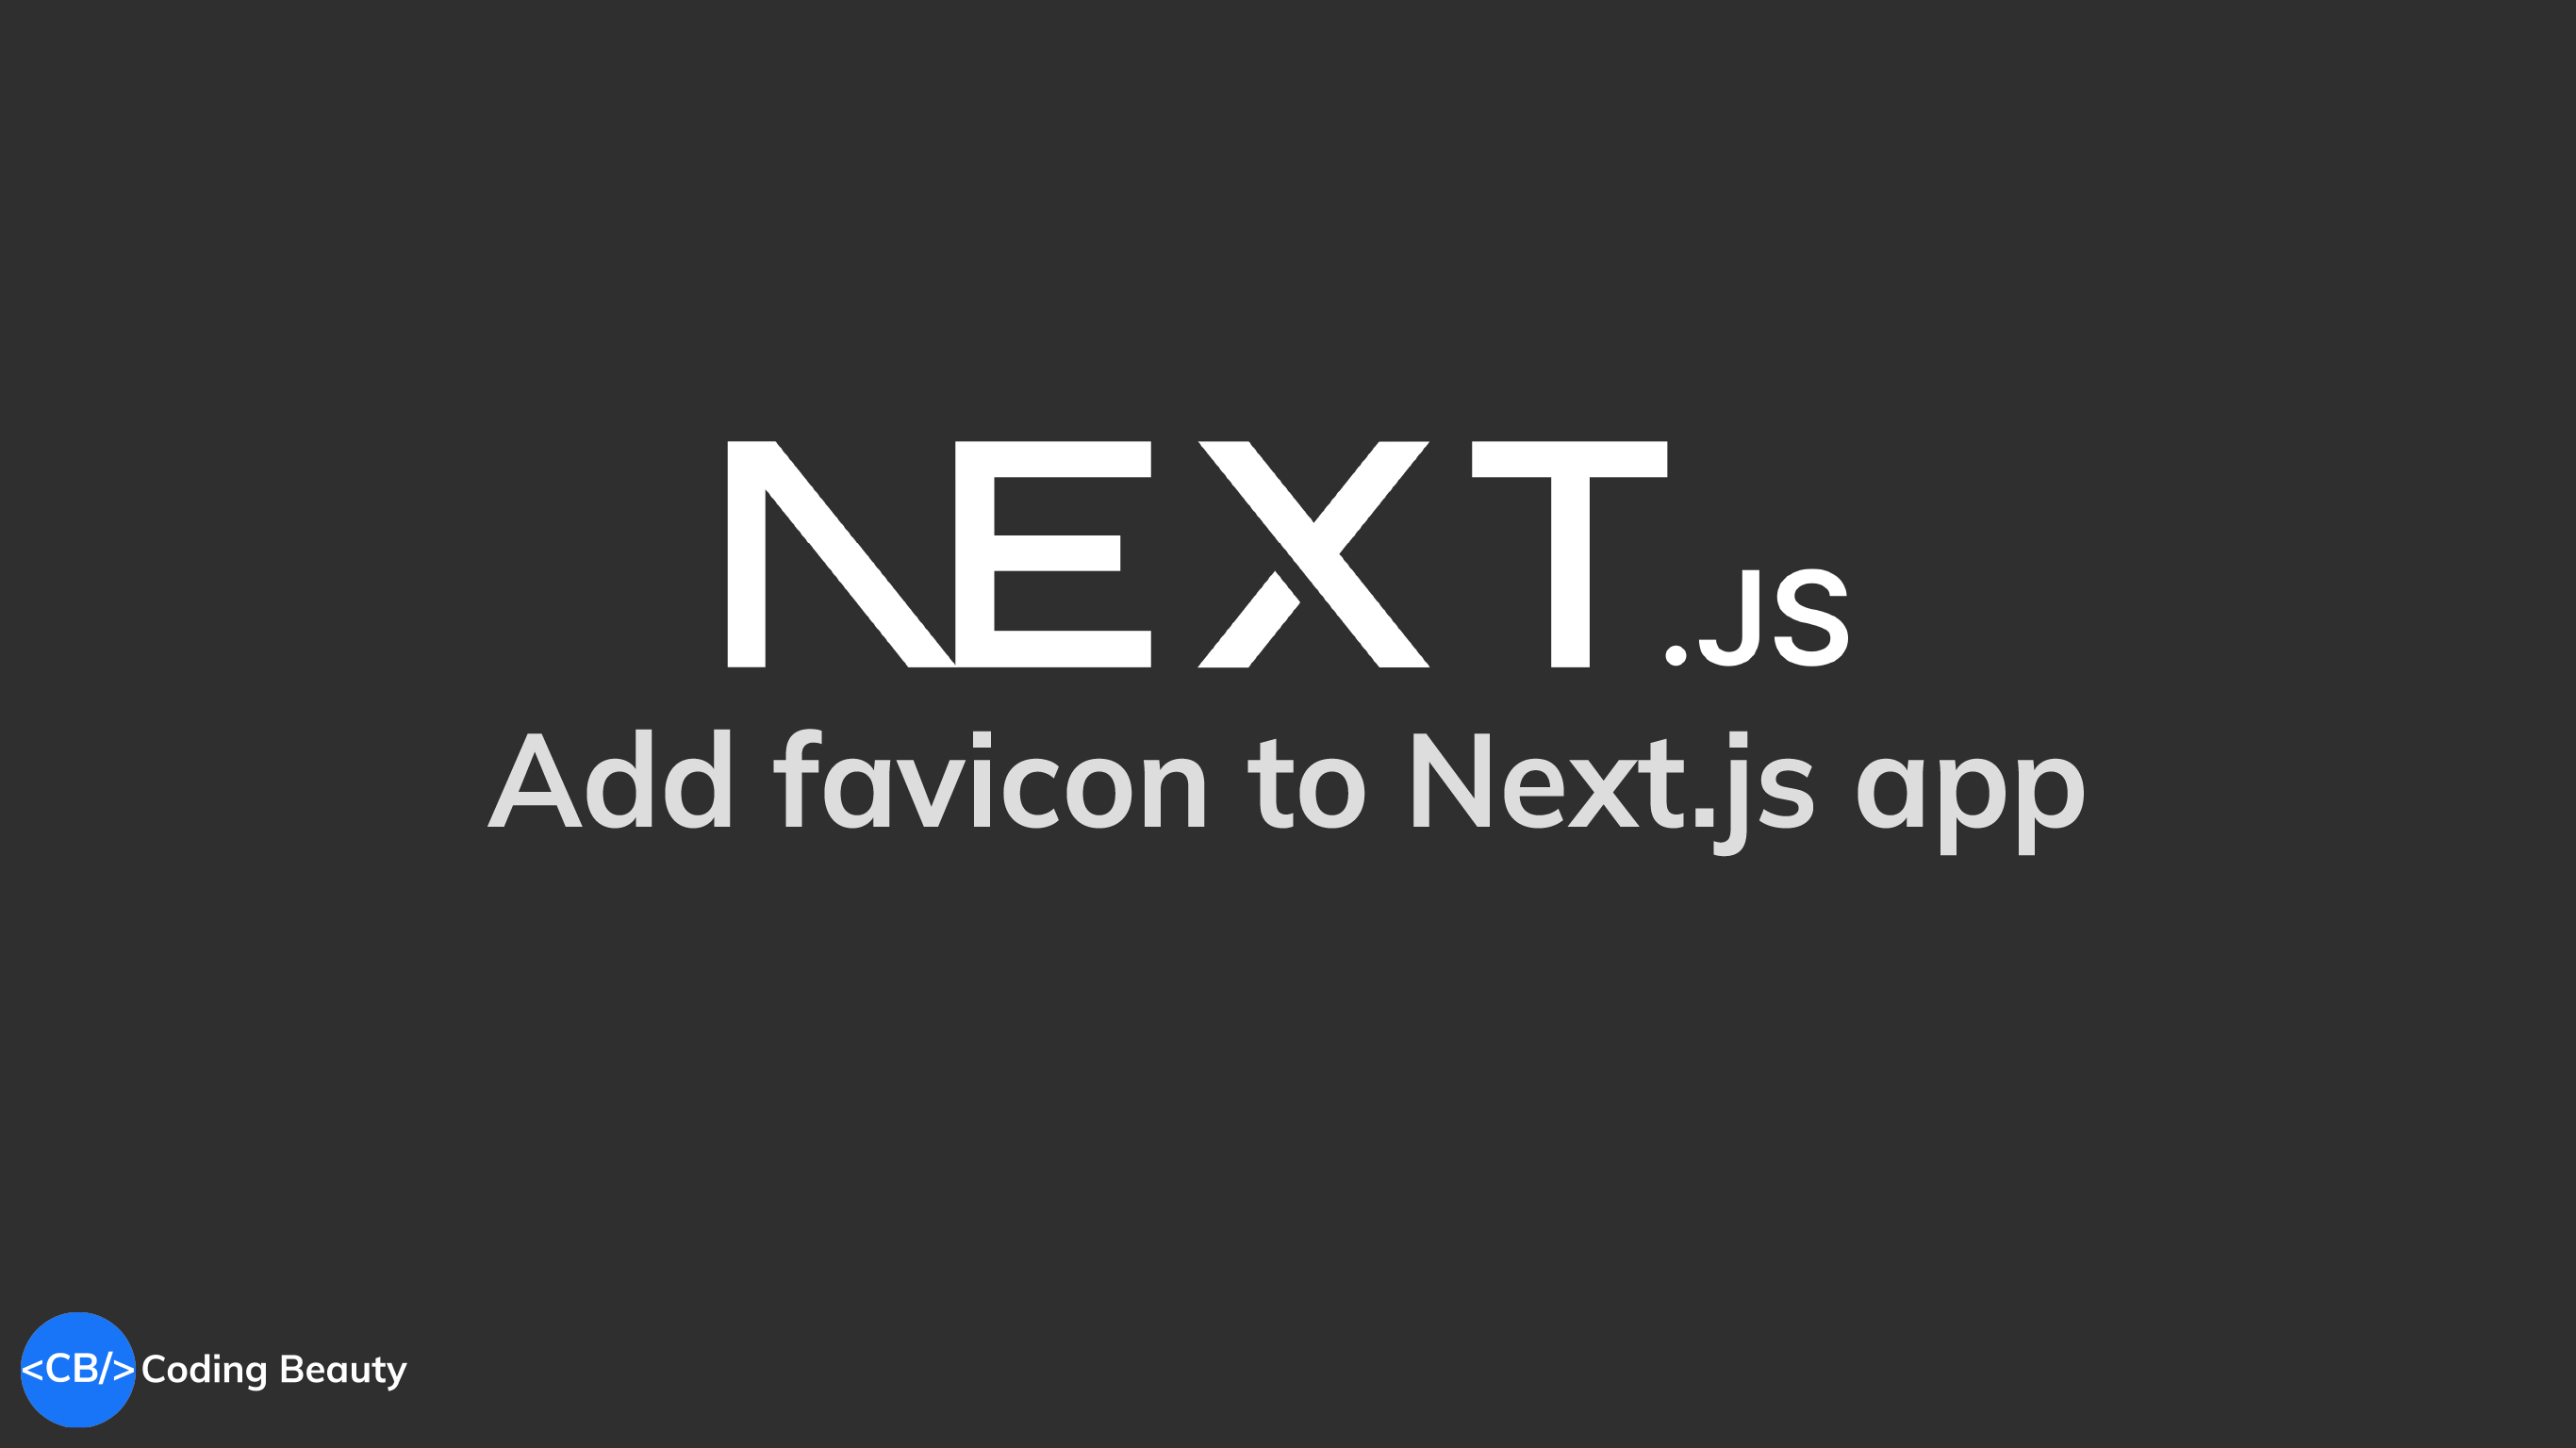 How to easily add a favicon to a Next.js app